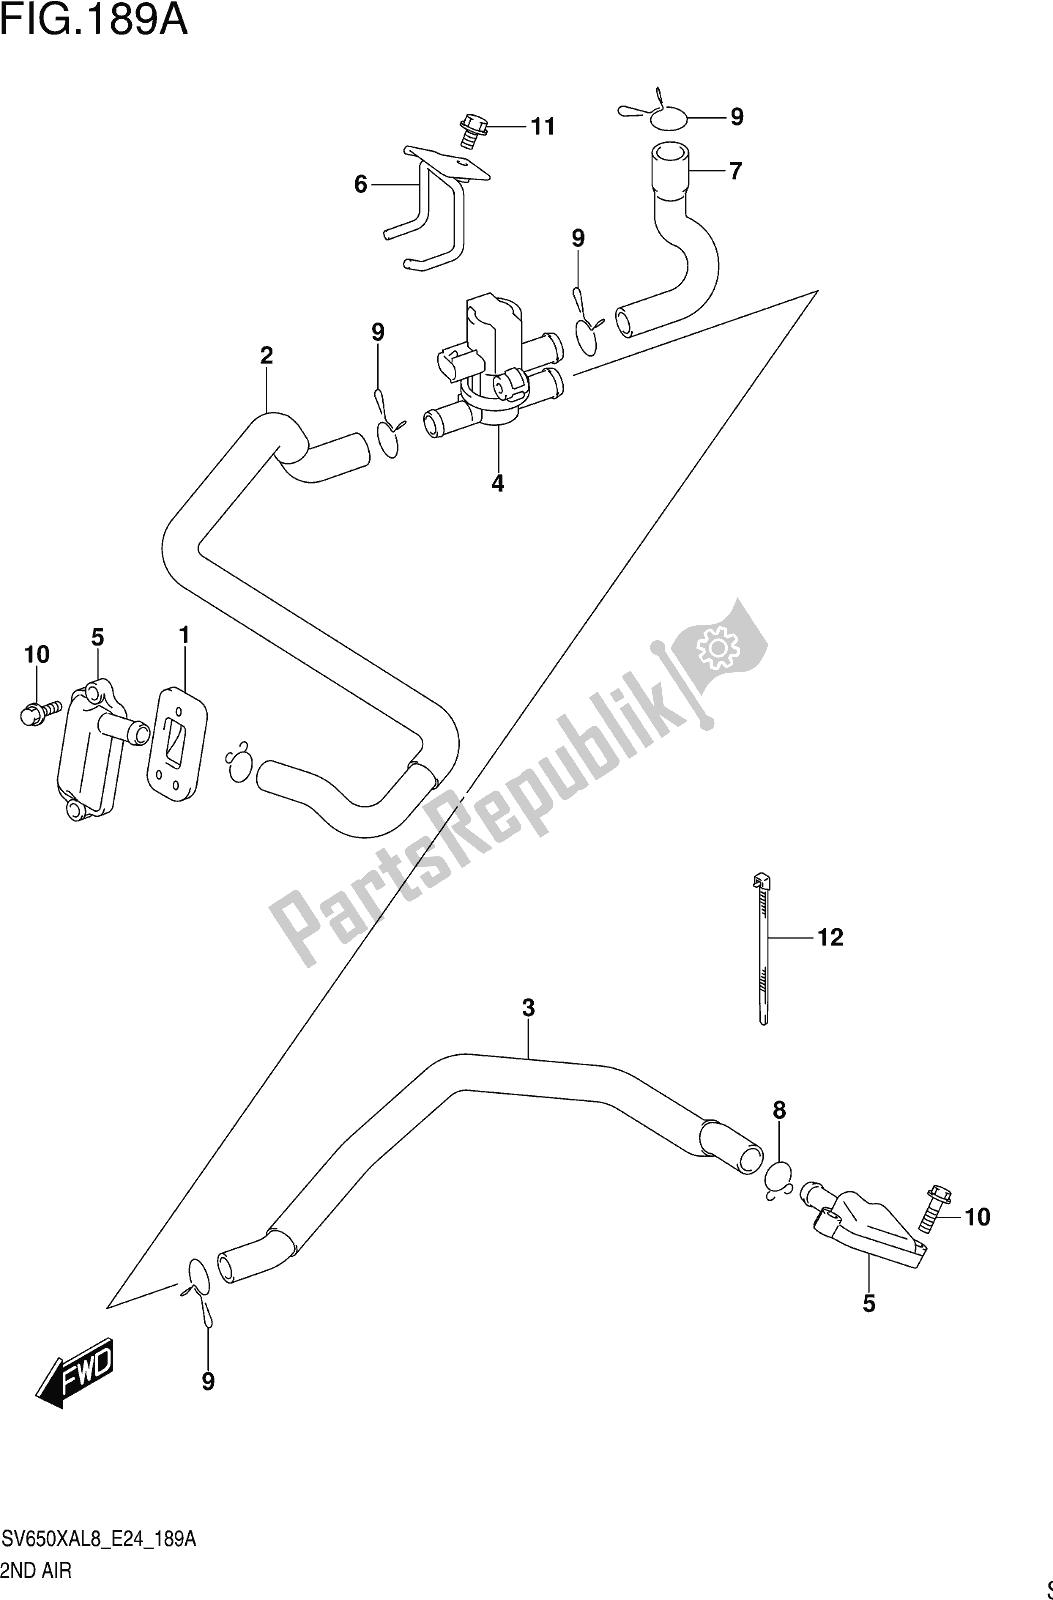 All parts for the Fig. 189a 2nd Air of the Suzuki SV 650 XA 2018